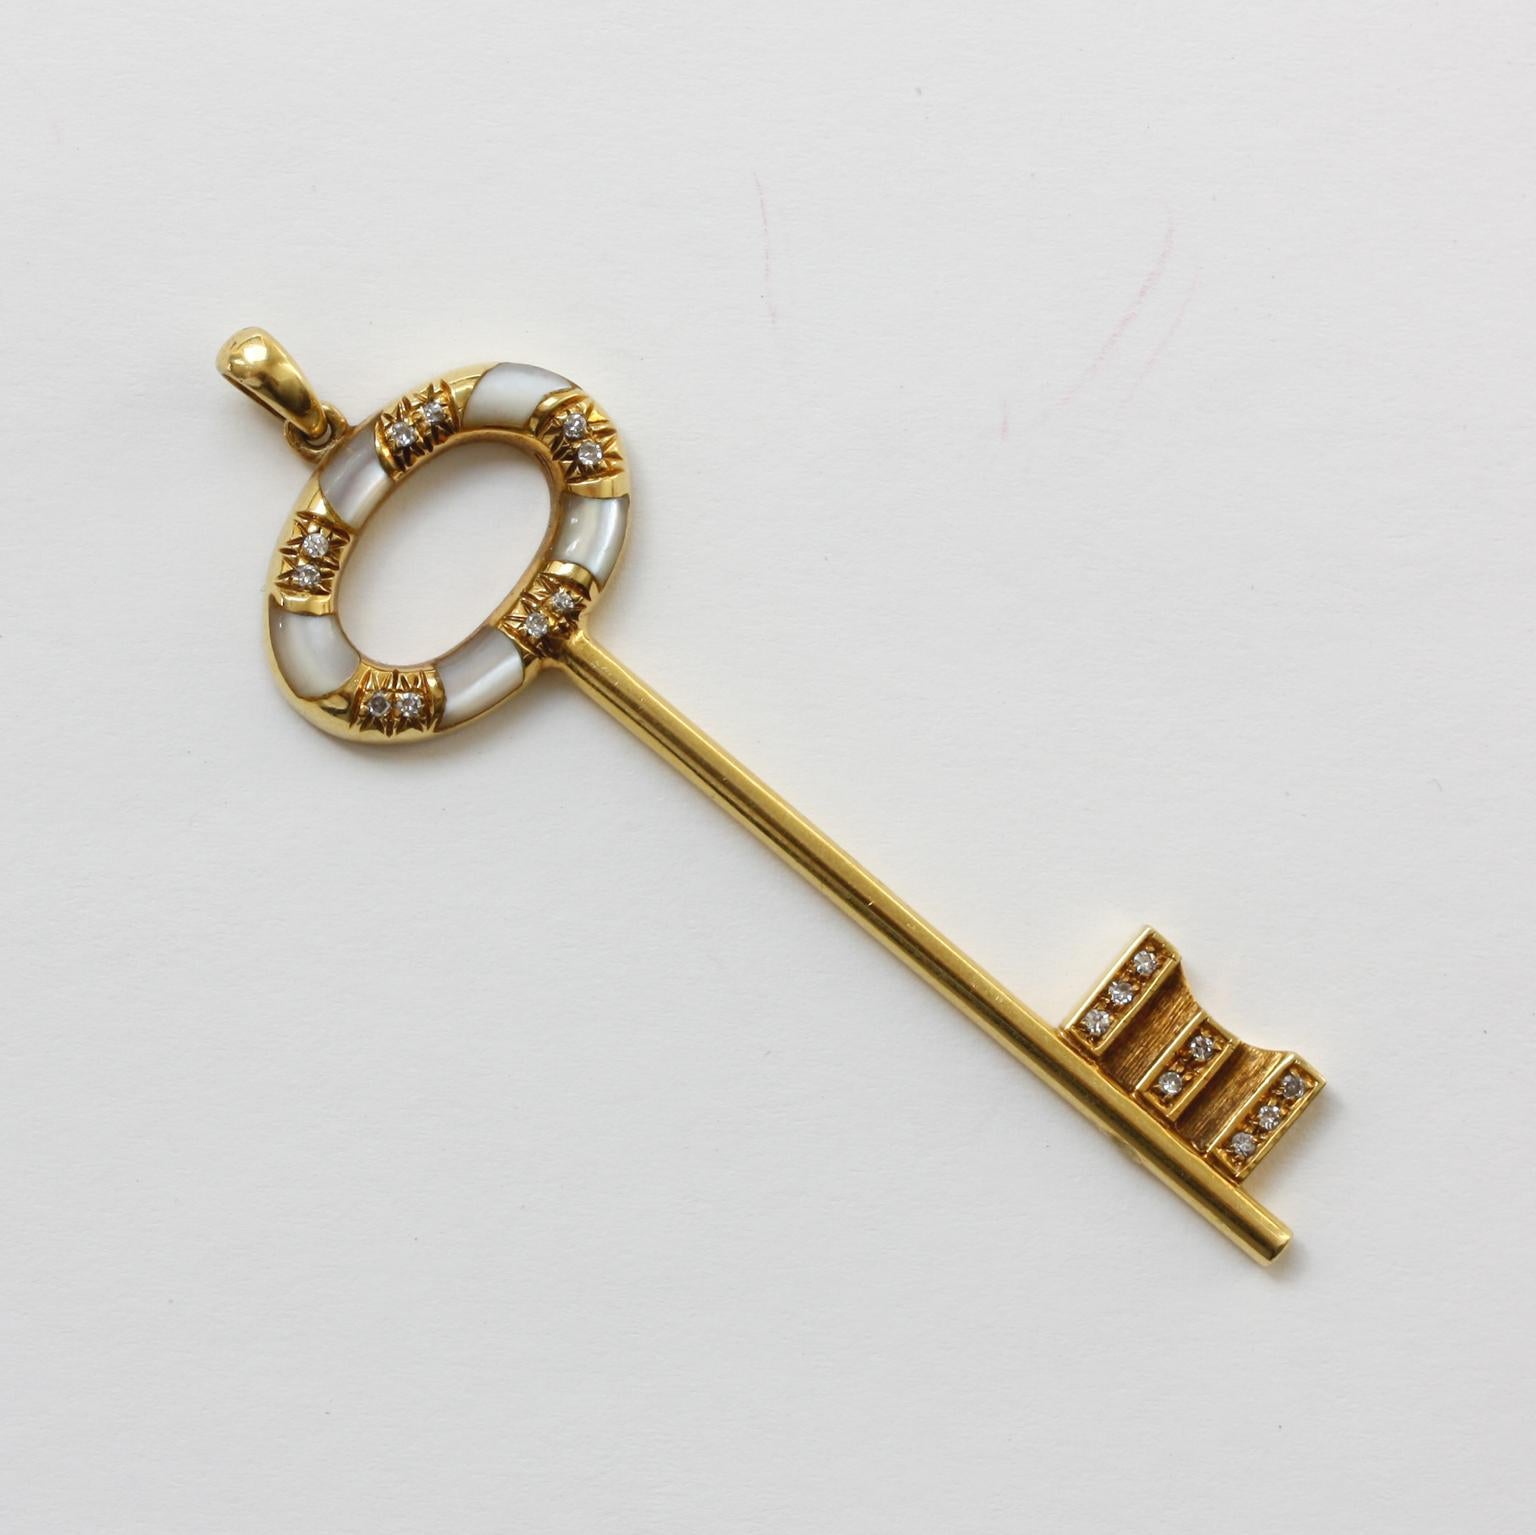 An 18 carat gold key pendant, the blade of the key is set with small diamonds and the bow of the key is decorated with and mother-of-pearl and diamonds (18 brilliant cut diamonds 0.18 carat in total), Italy, circa 1980.

weight: 6.7 gram
dimensions: